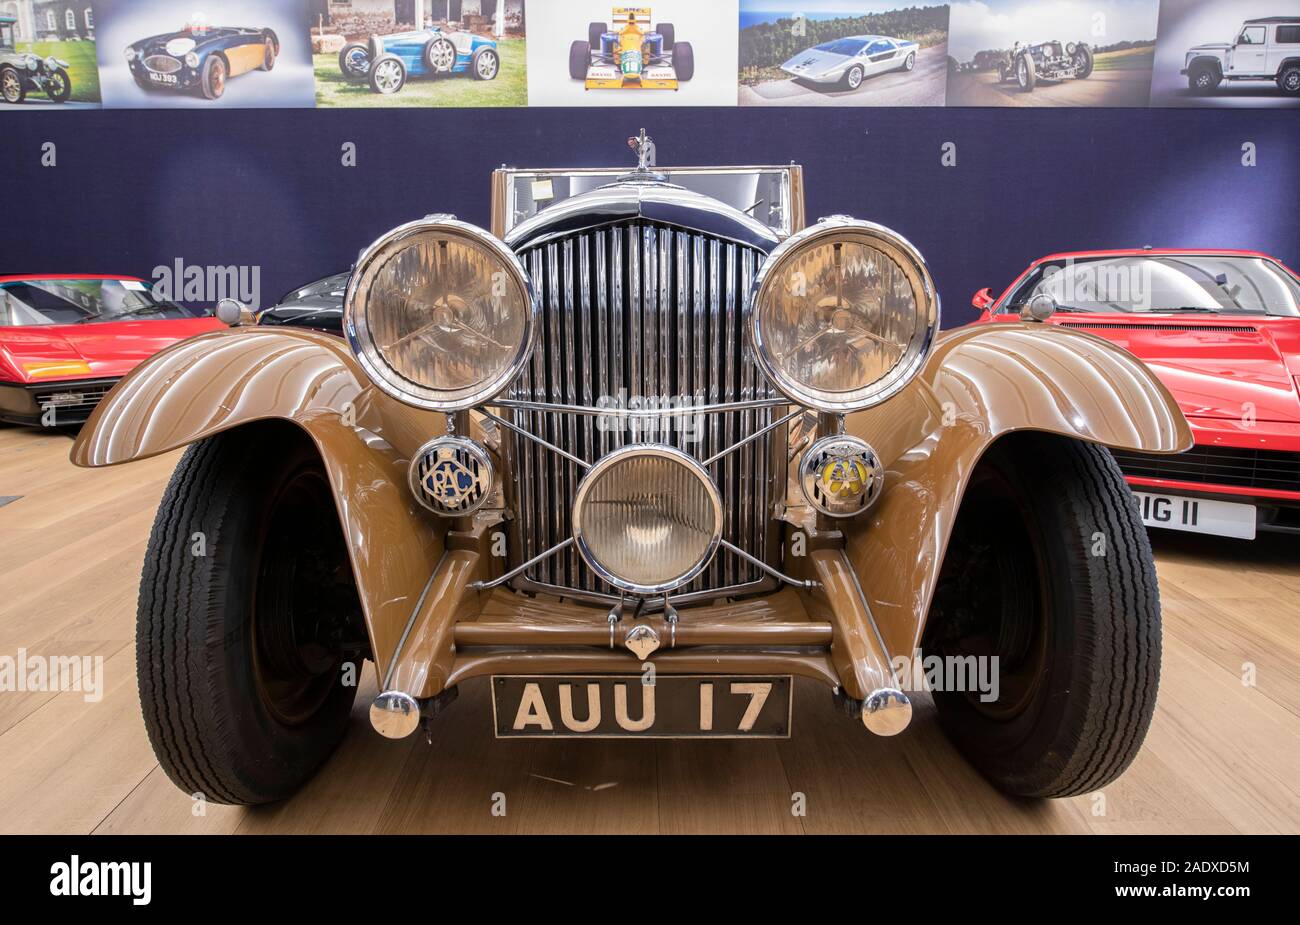 Bonhams, London, UK. 5th December 2019. Bonhams Bond Street Fine Collectors’ Motor Car sale preview includes cars owned by Jay Kay, Barbara Hutton, HRH The Prince of Wales, Jools Holland. The sale takes place on 7th December. Image: 1933 Bentley 3½-Litre Cabriolet. Coachwork by Barker & Co. Estimate: £130,000-160,000. Credit: Malcolm Park/Alamy Live News. Stock Photo